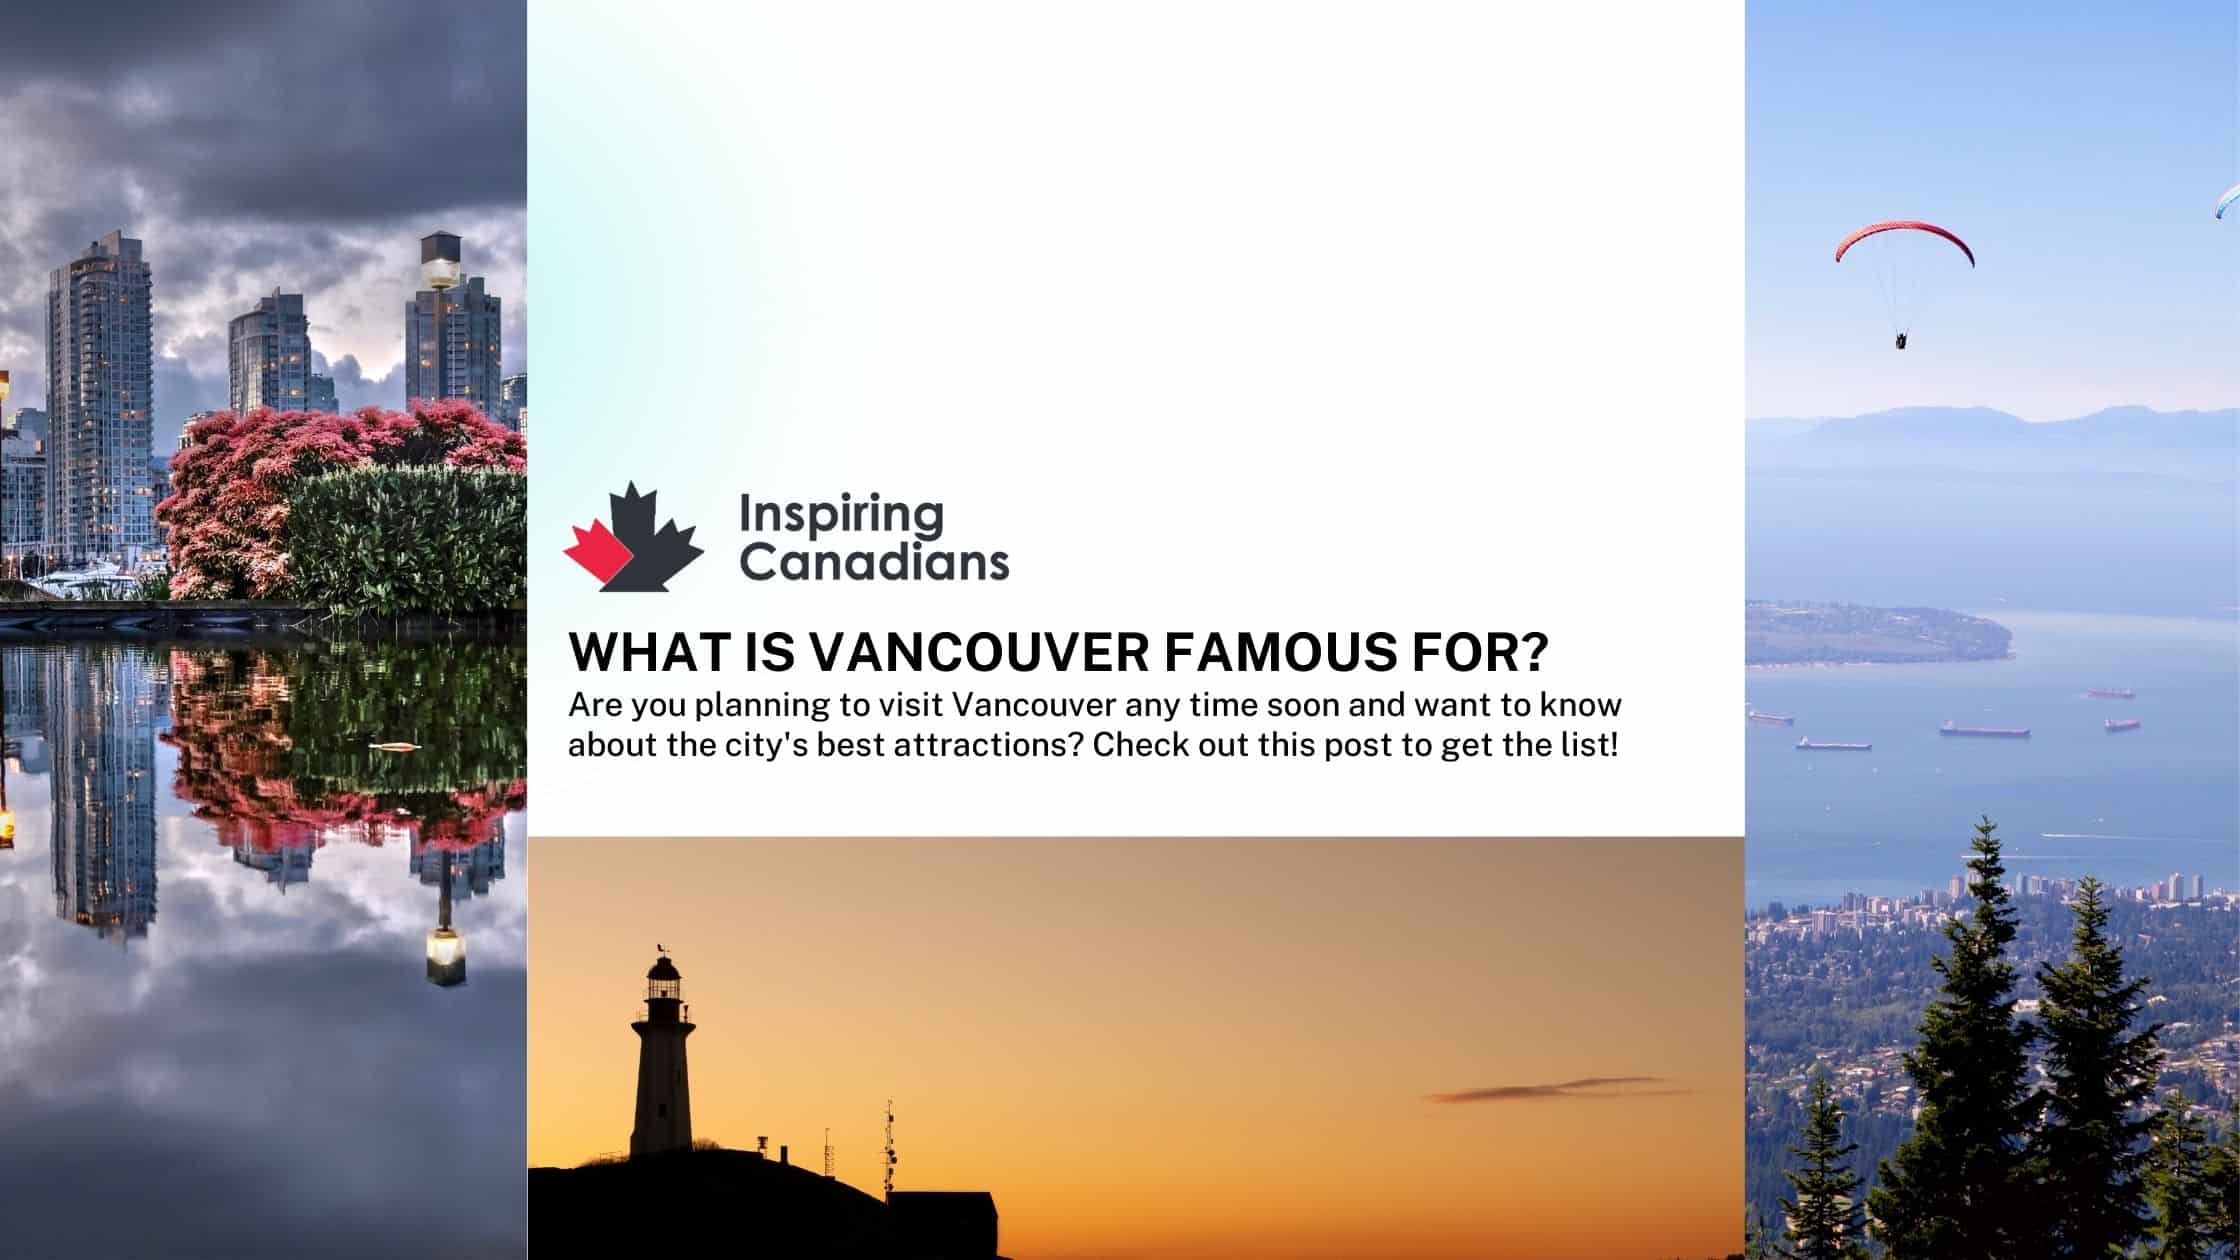 What is Vancouver famous for?